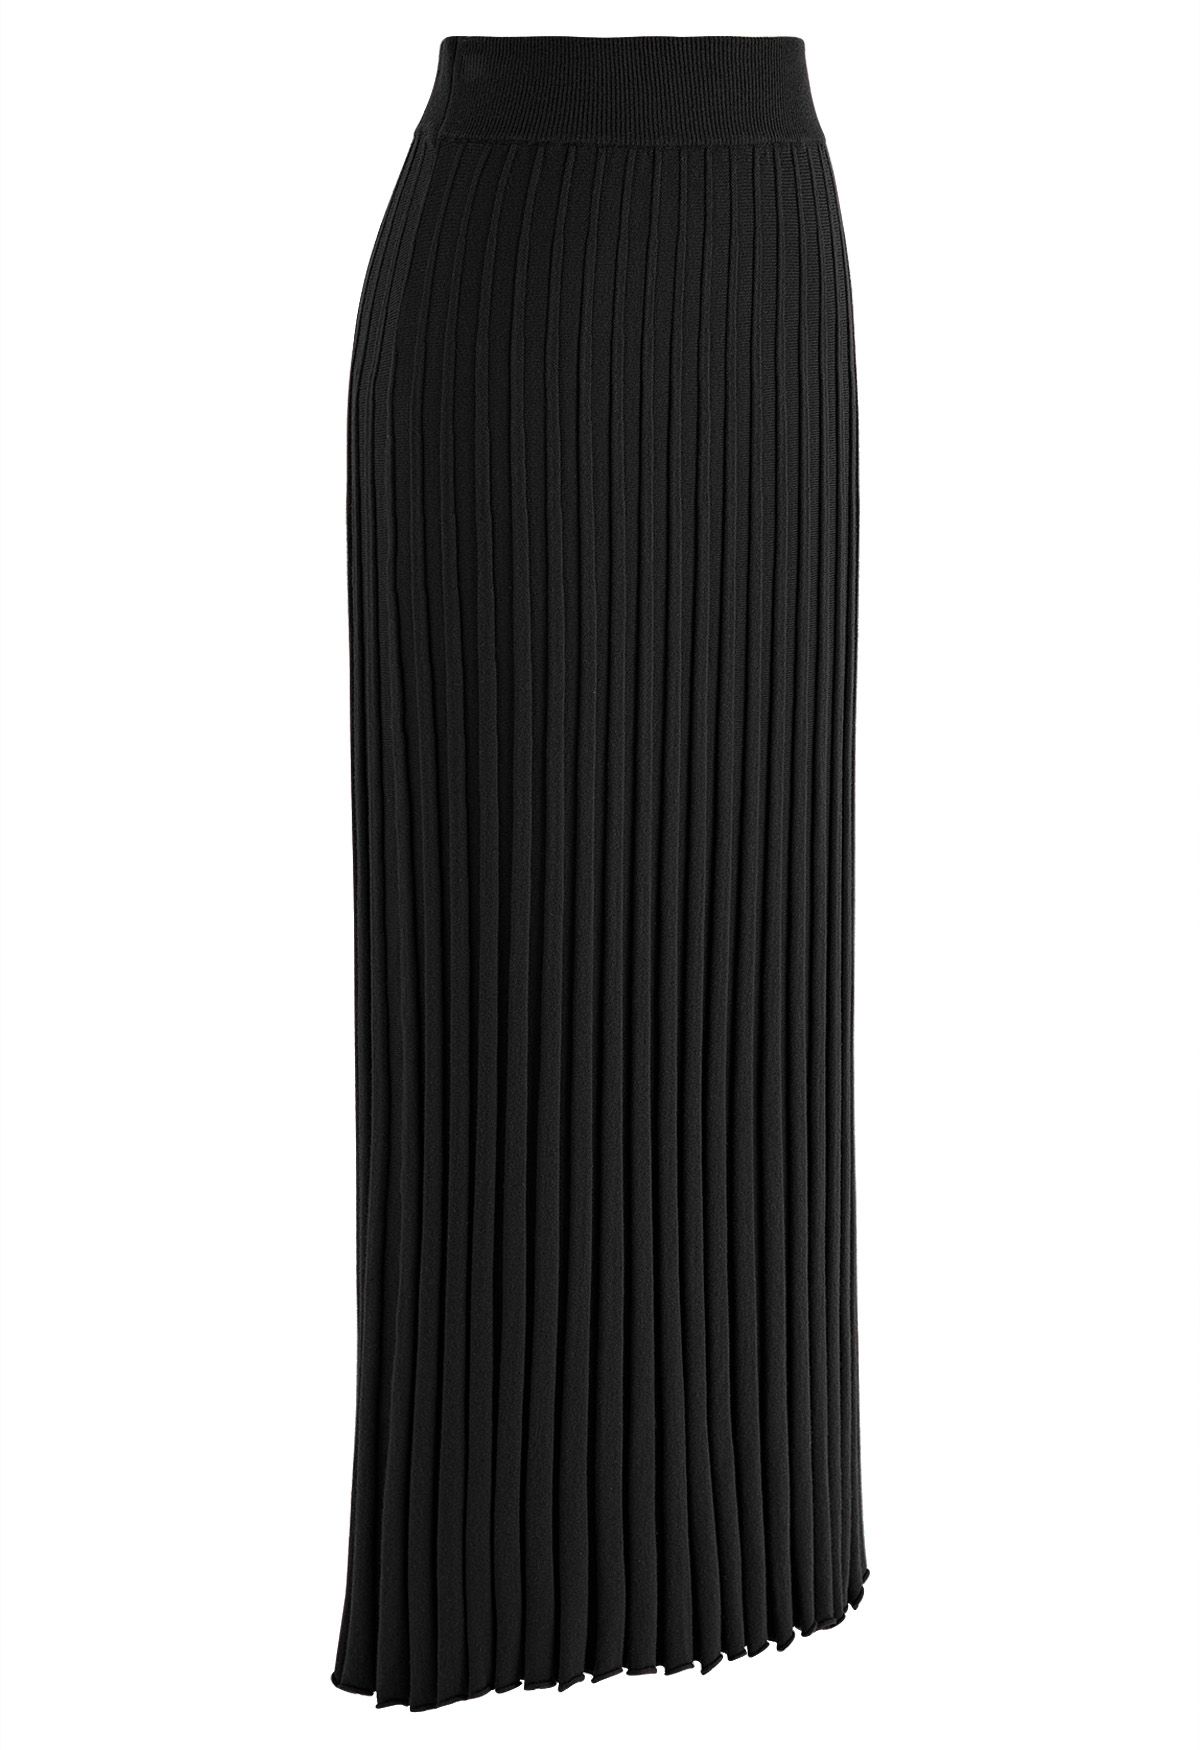 Ultra-Soft Lettuce Hem Knit Maxi Skirt in Black - Retro, Indie and ...